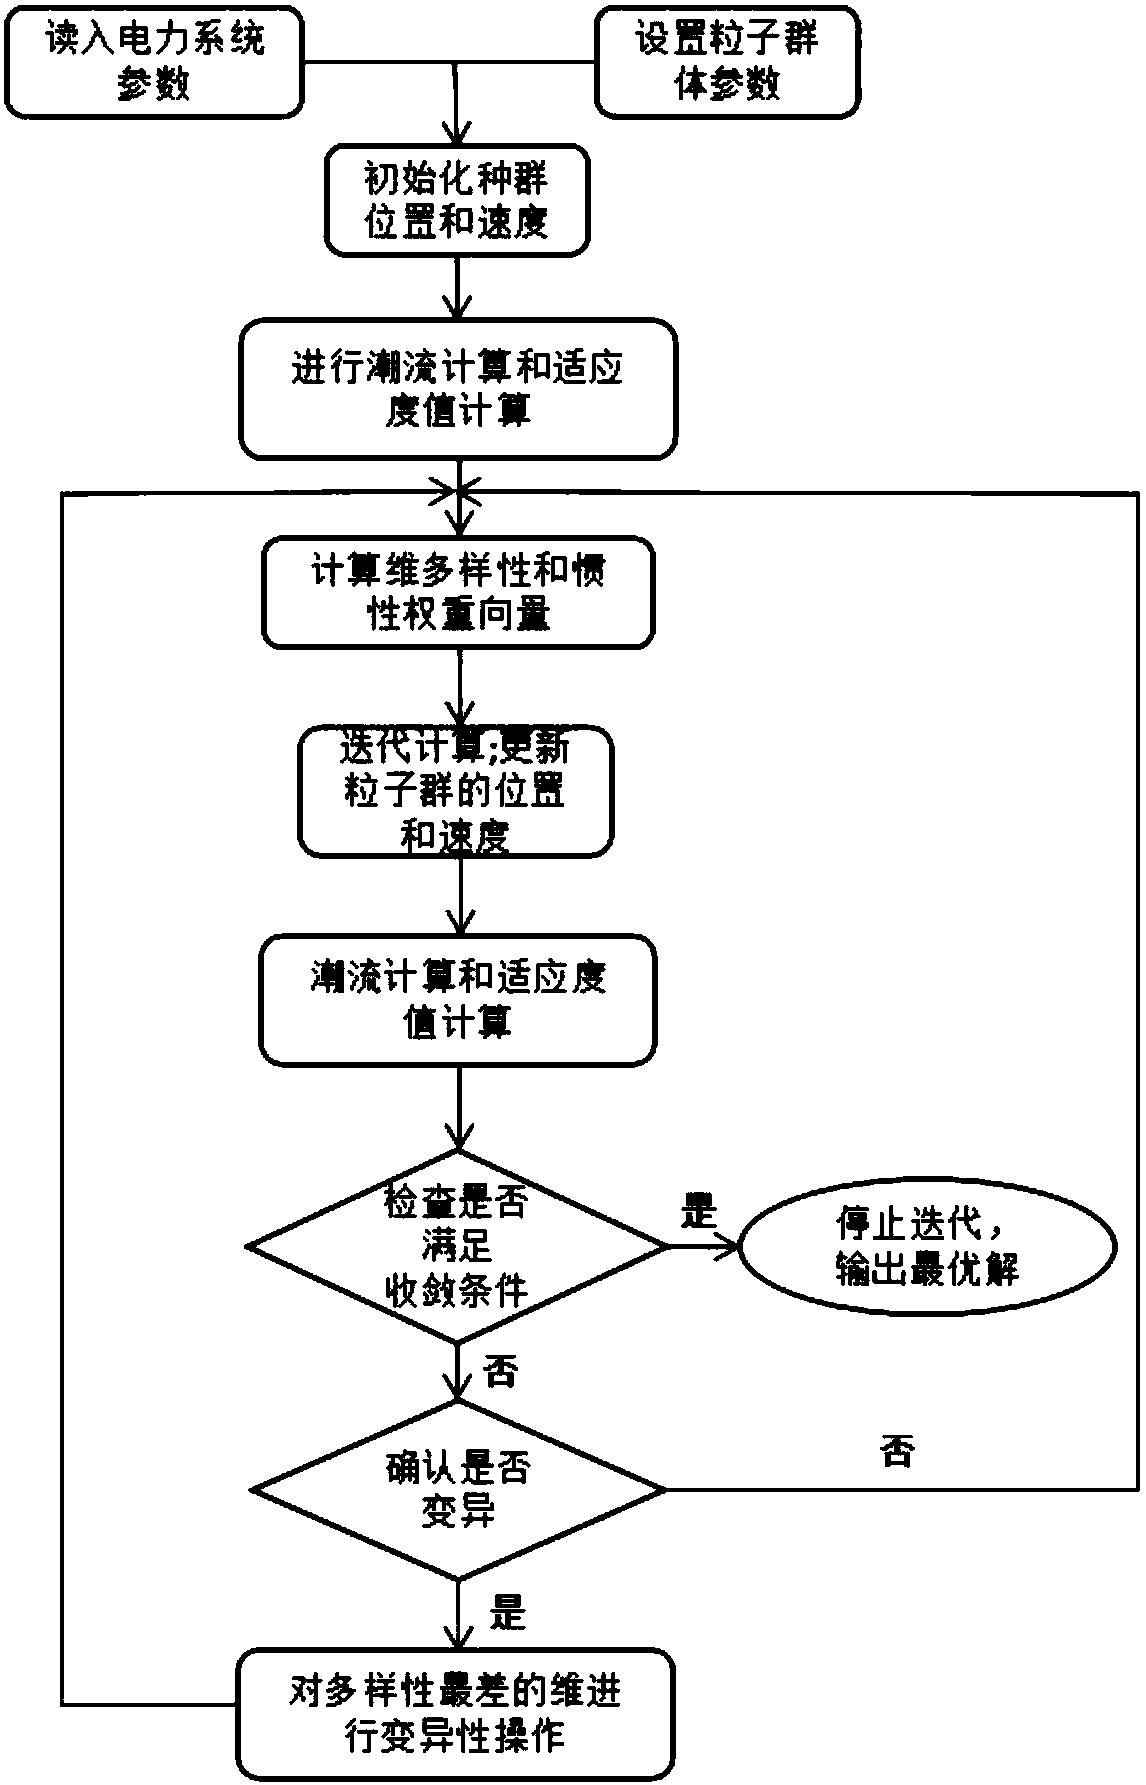 Optimization method of electric power system